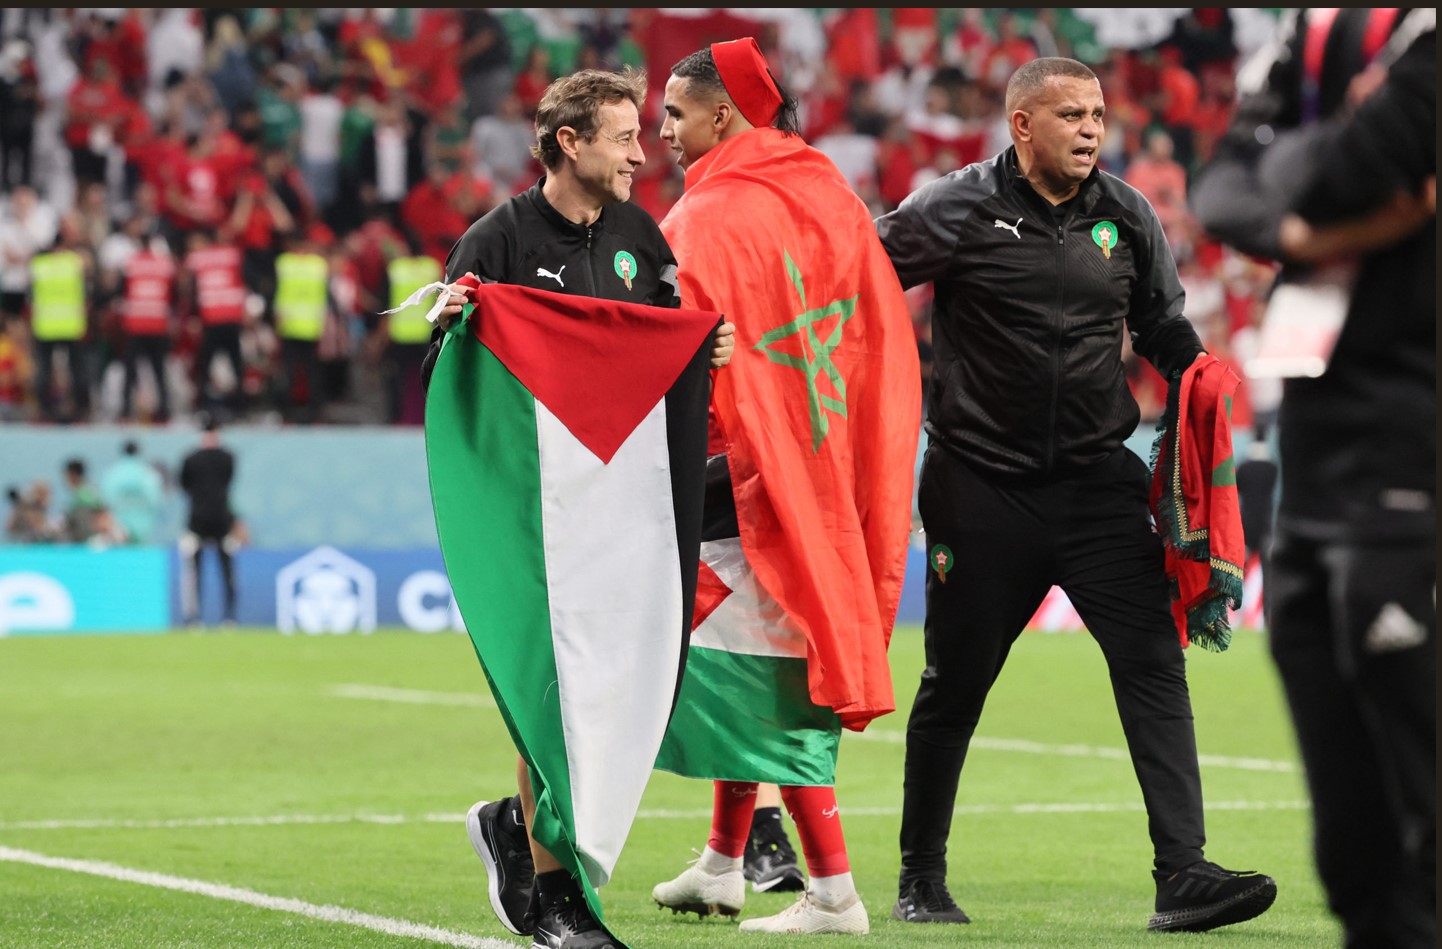 Morocco beat Spain Highlights: Morocco players celebrate with Palestinian flag after Spain upset: Follow FIFA World Cup 2022